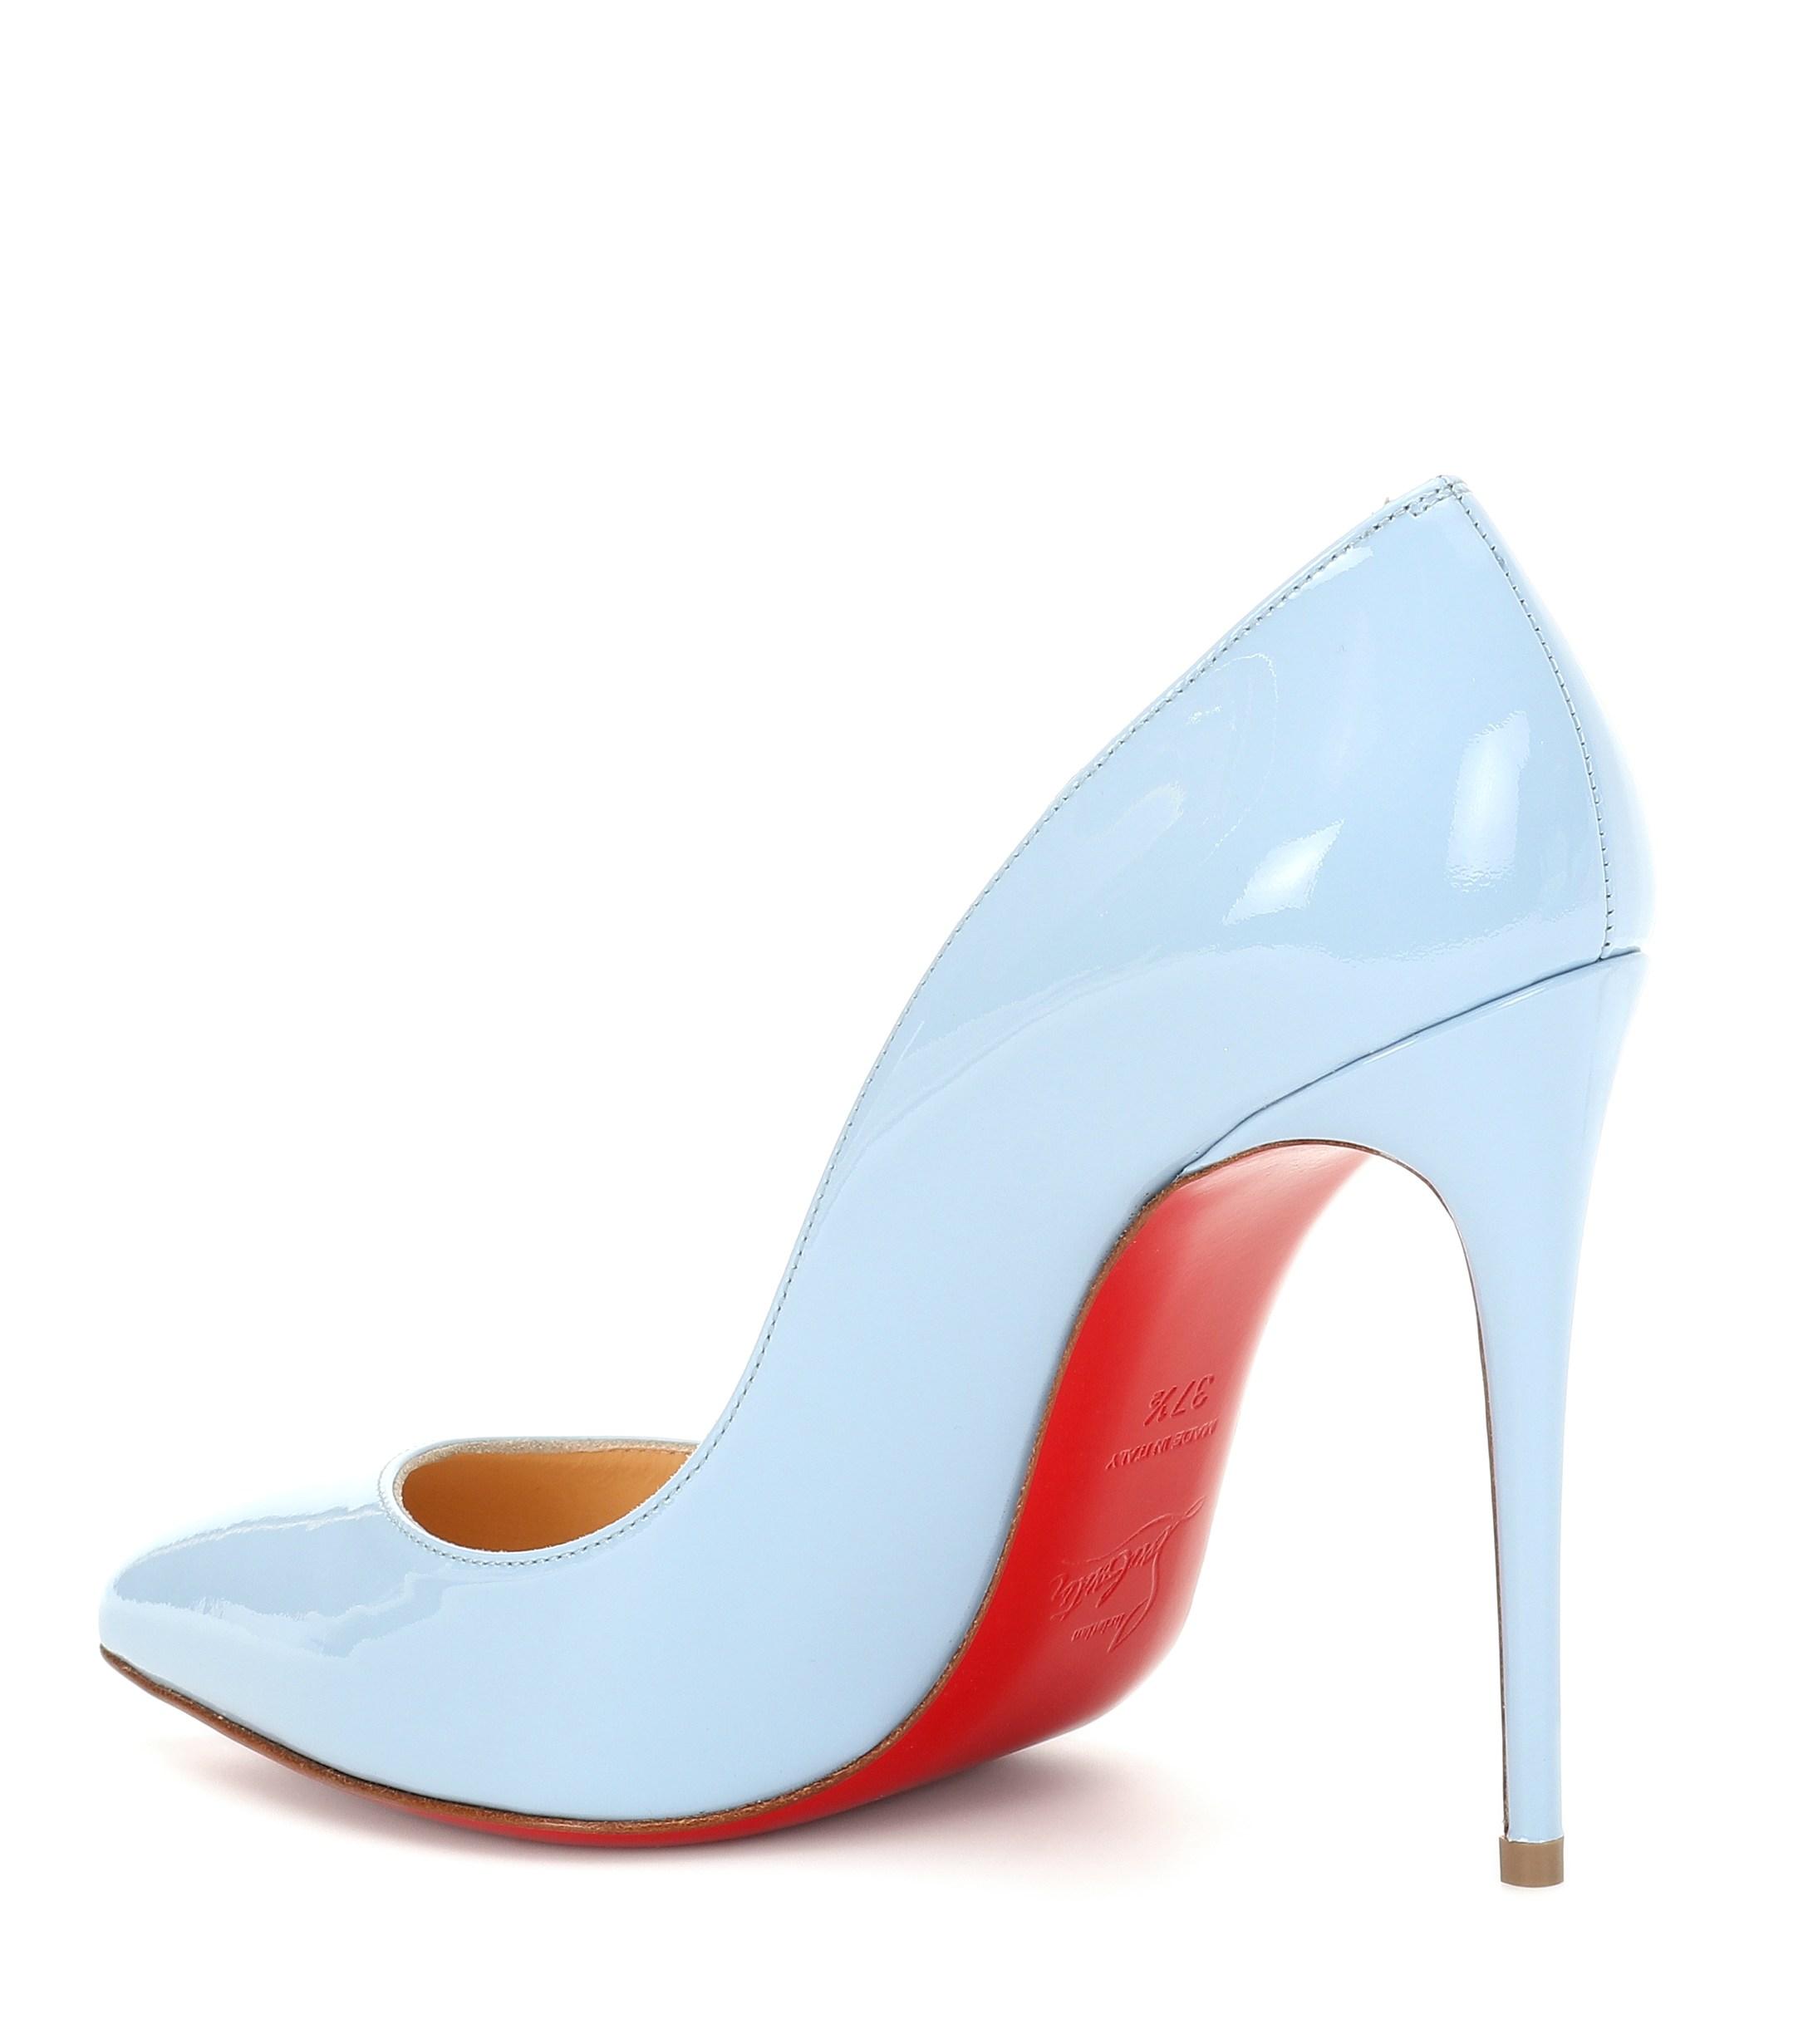 Christian Louboutin Pigalle Follies Patent Leather Pumps in Sky (Blue) Lyst